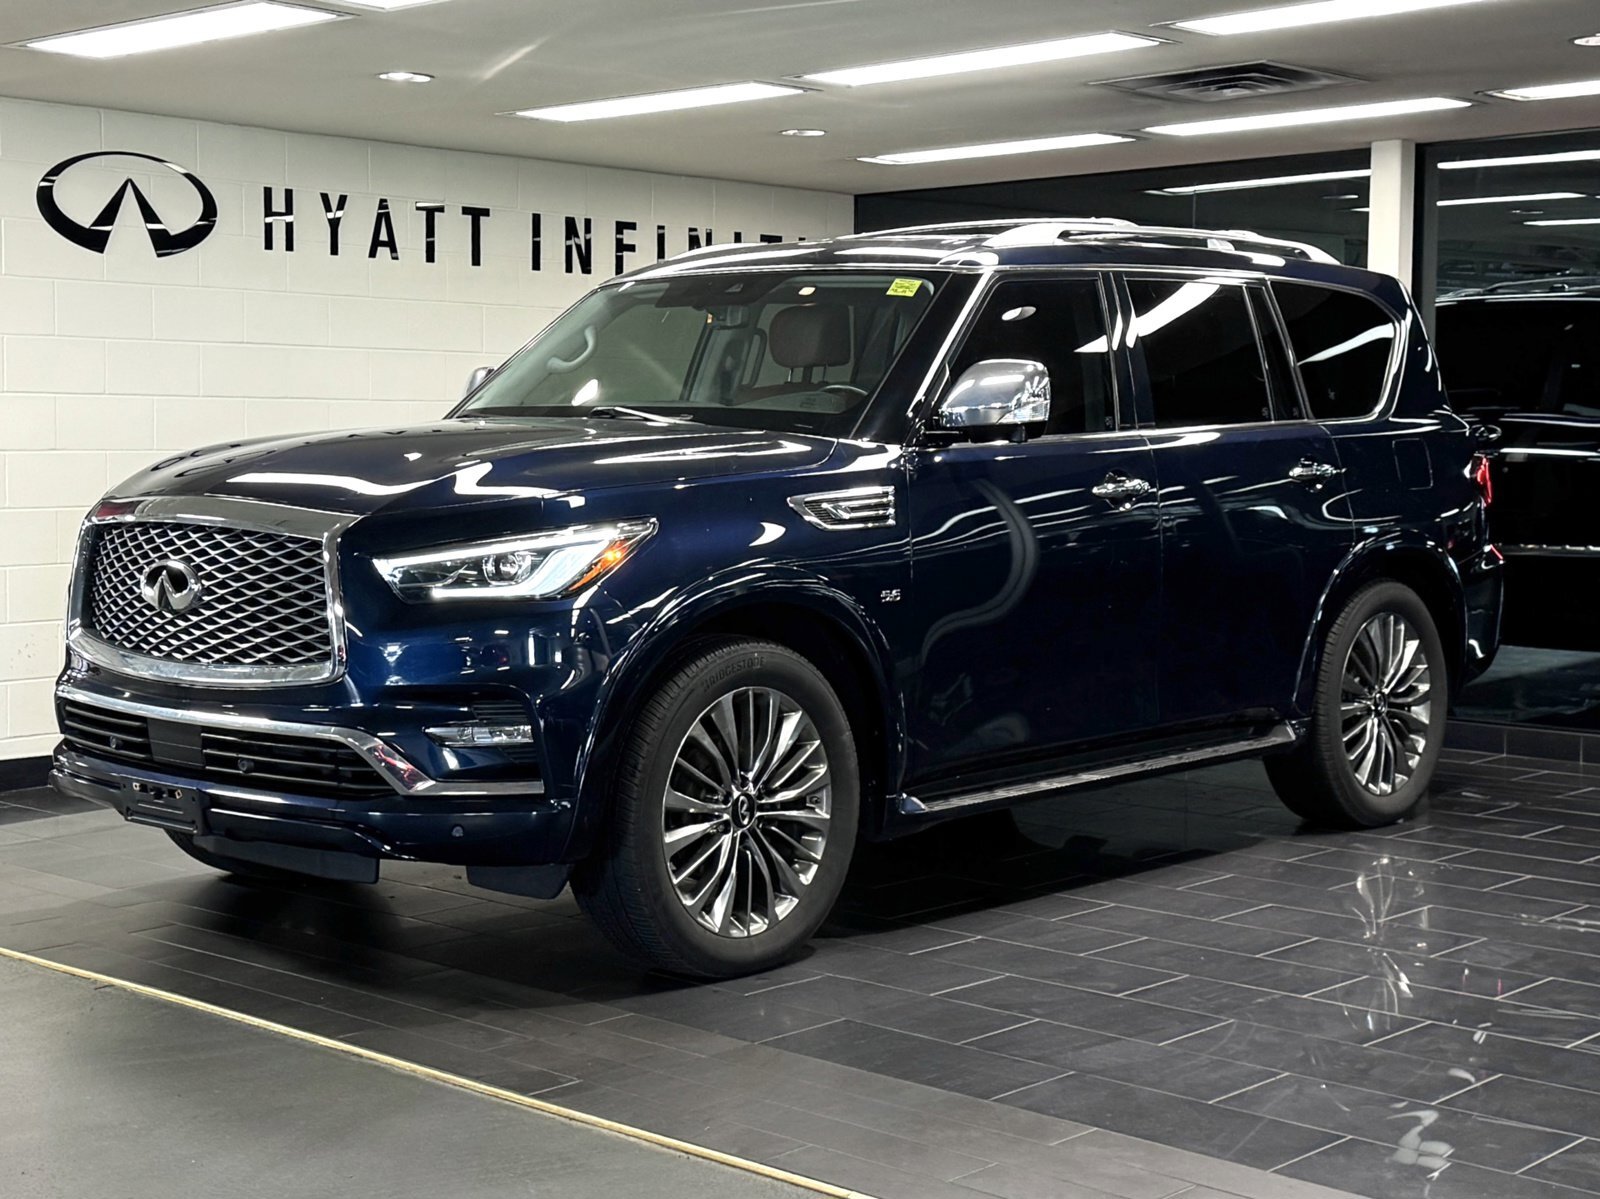 2019 Infiniti QX80 ProACTIVE 8 Passenger - No Accidents | One Owner |